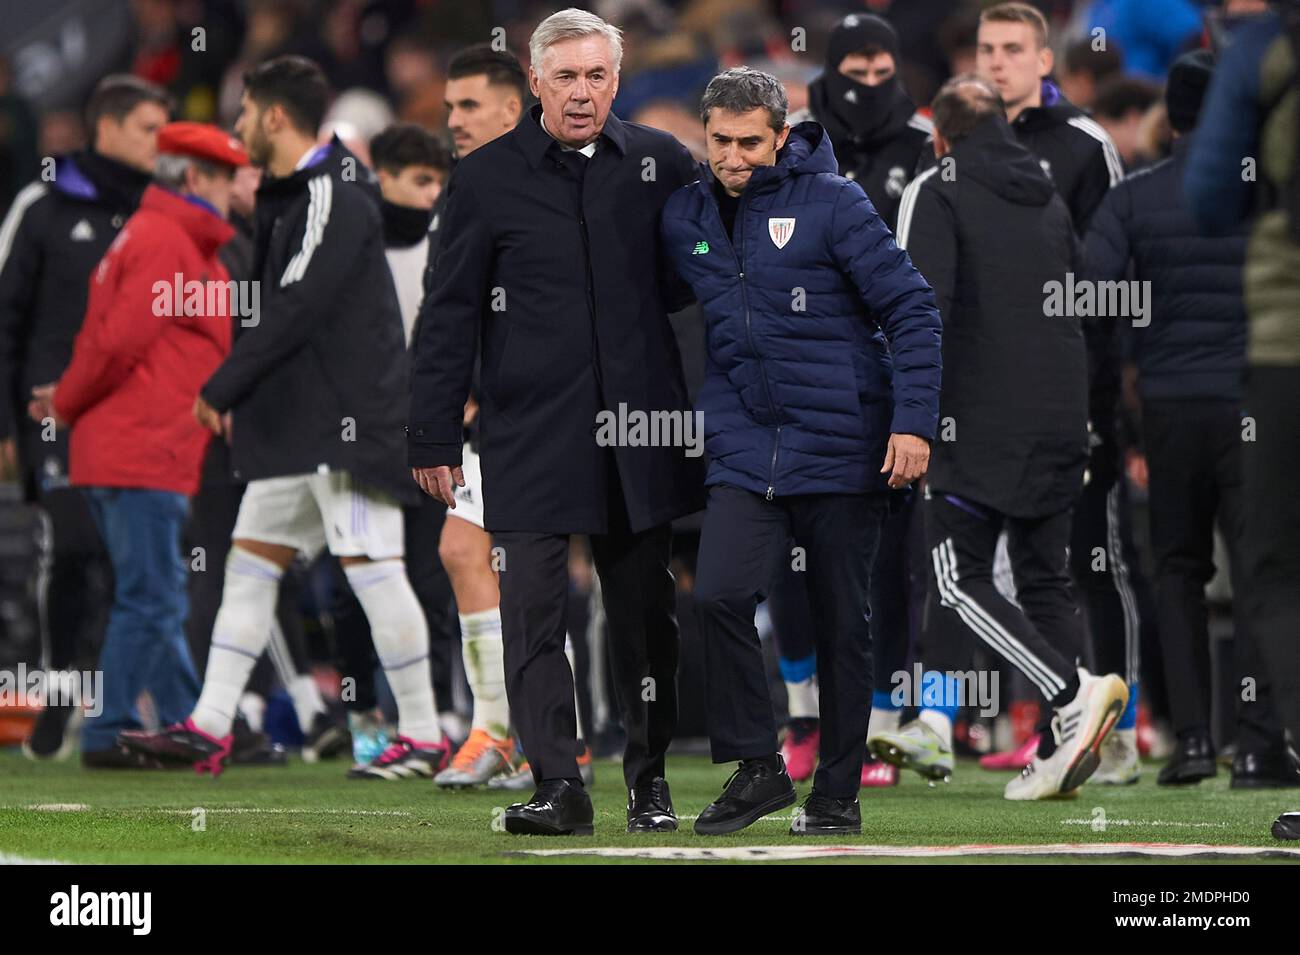 Athletic Club head coach Ernesto Valverde and Real Madrid CF head coach Carlo Ancelotti during the La Liga match between Athletic Club and Real Madrid played at San Mames Stadium on January 22, 2023 in Bilbao, Spain. (Photo by Cesar Ortiz / PRESSIN) Stock Photo